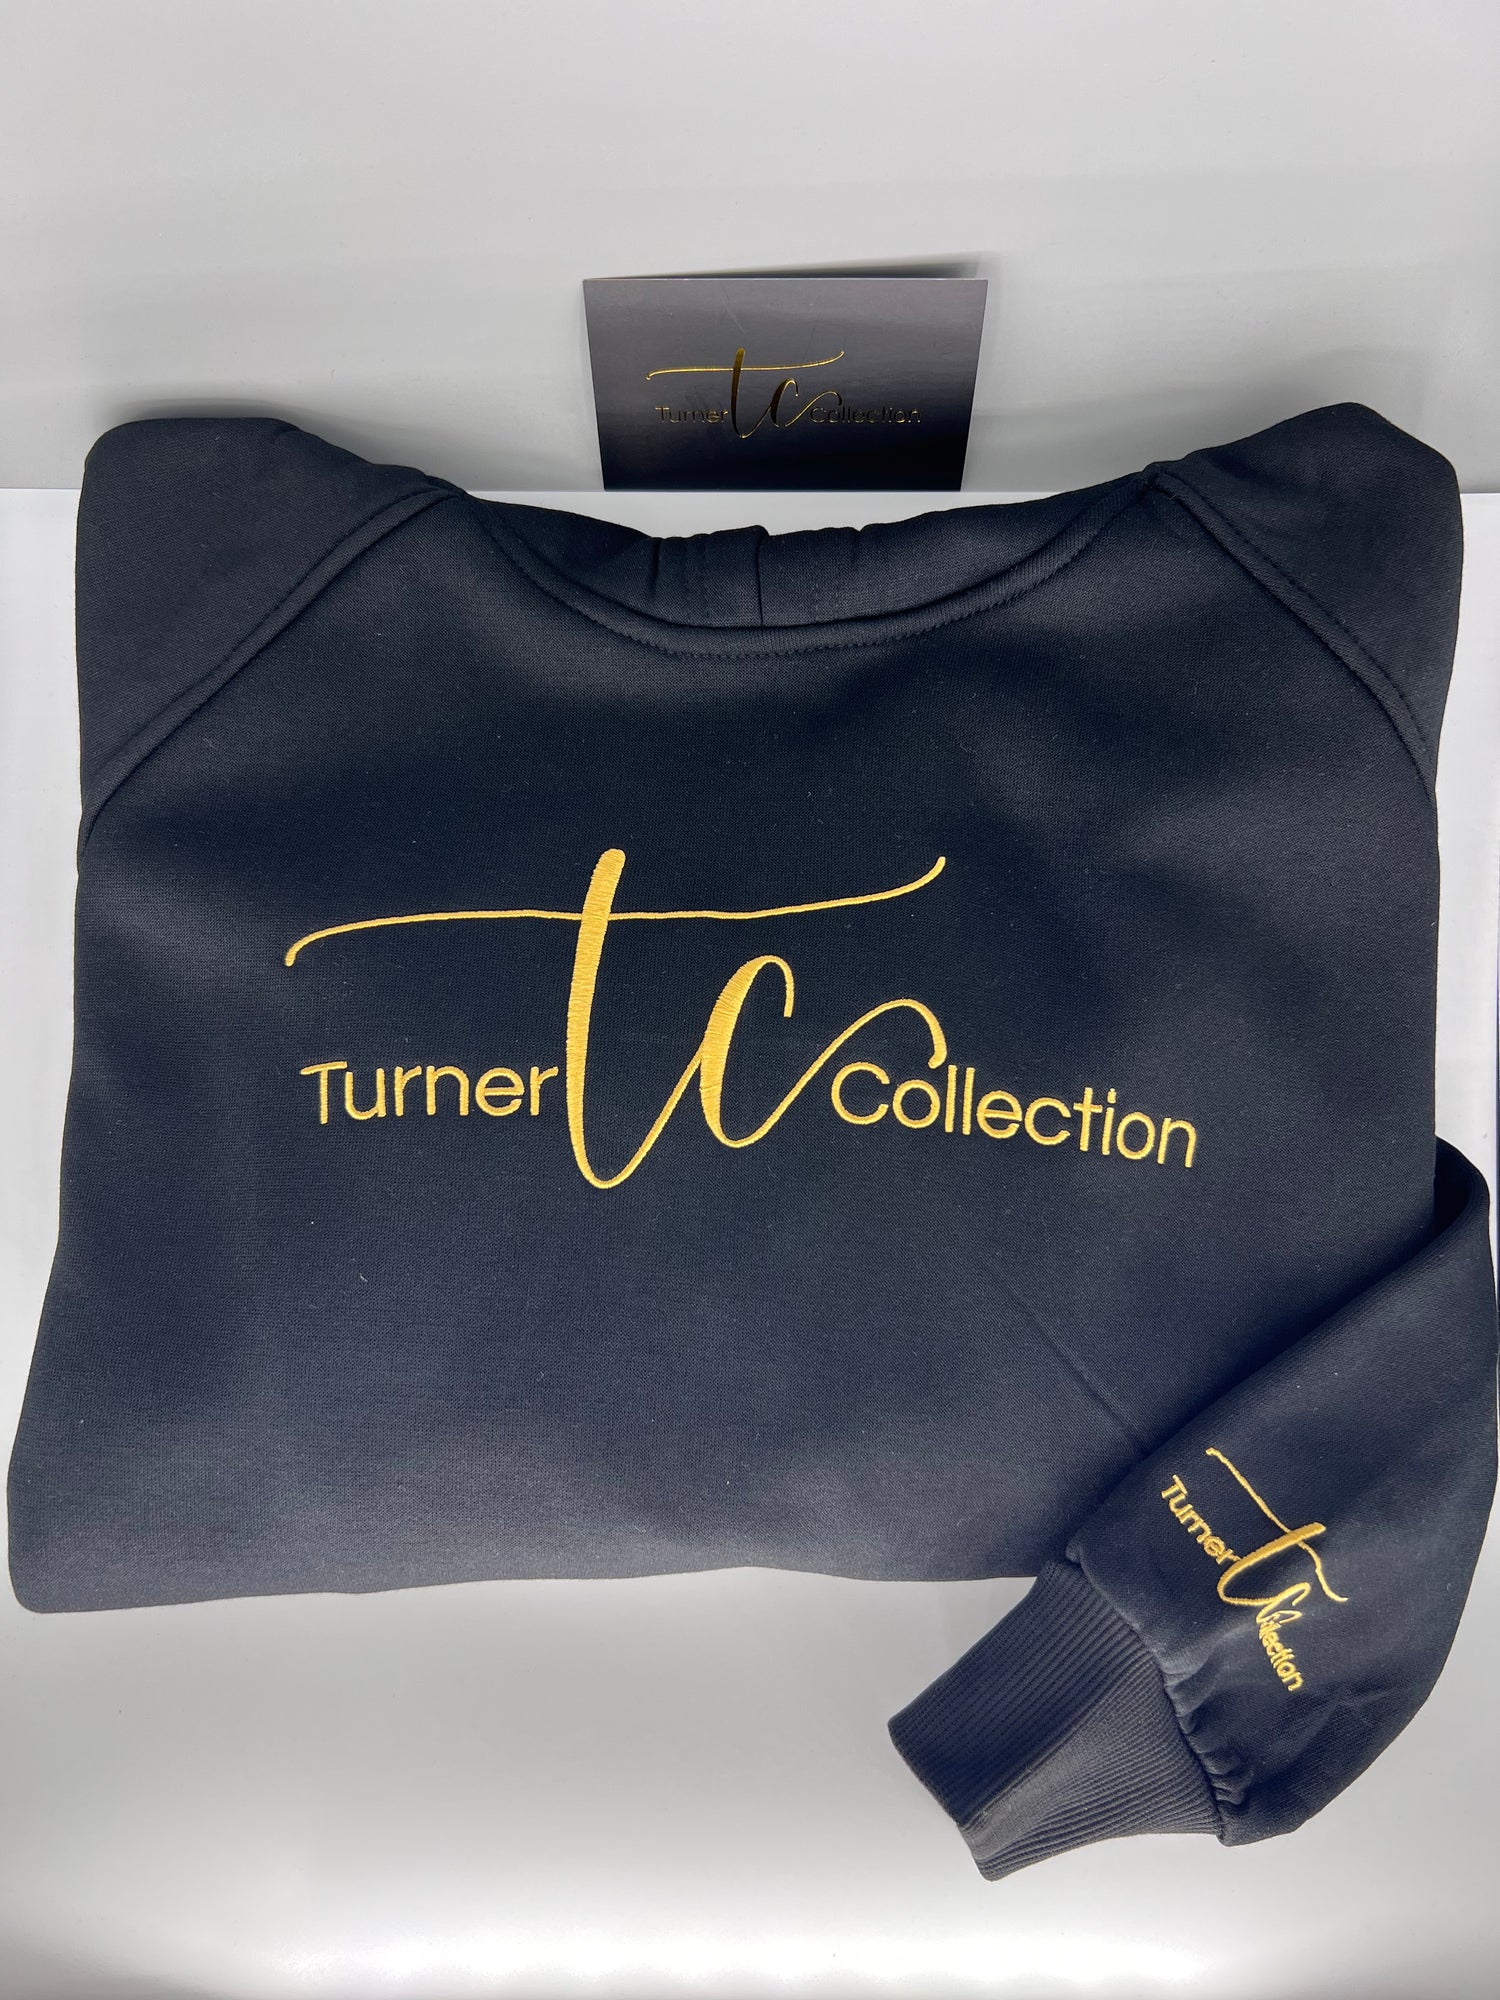 Turner Collection Hoodies